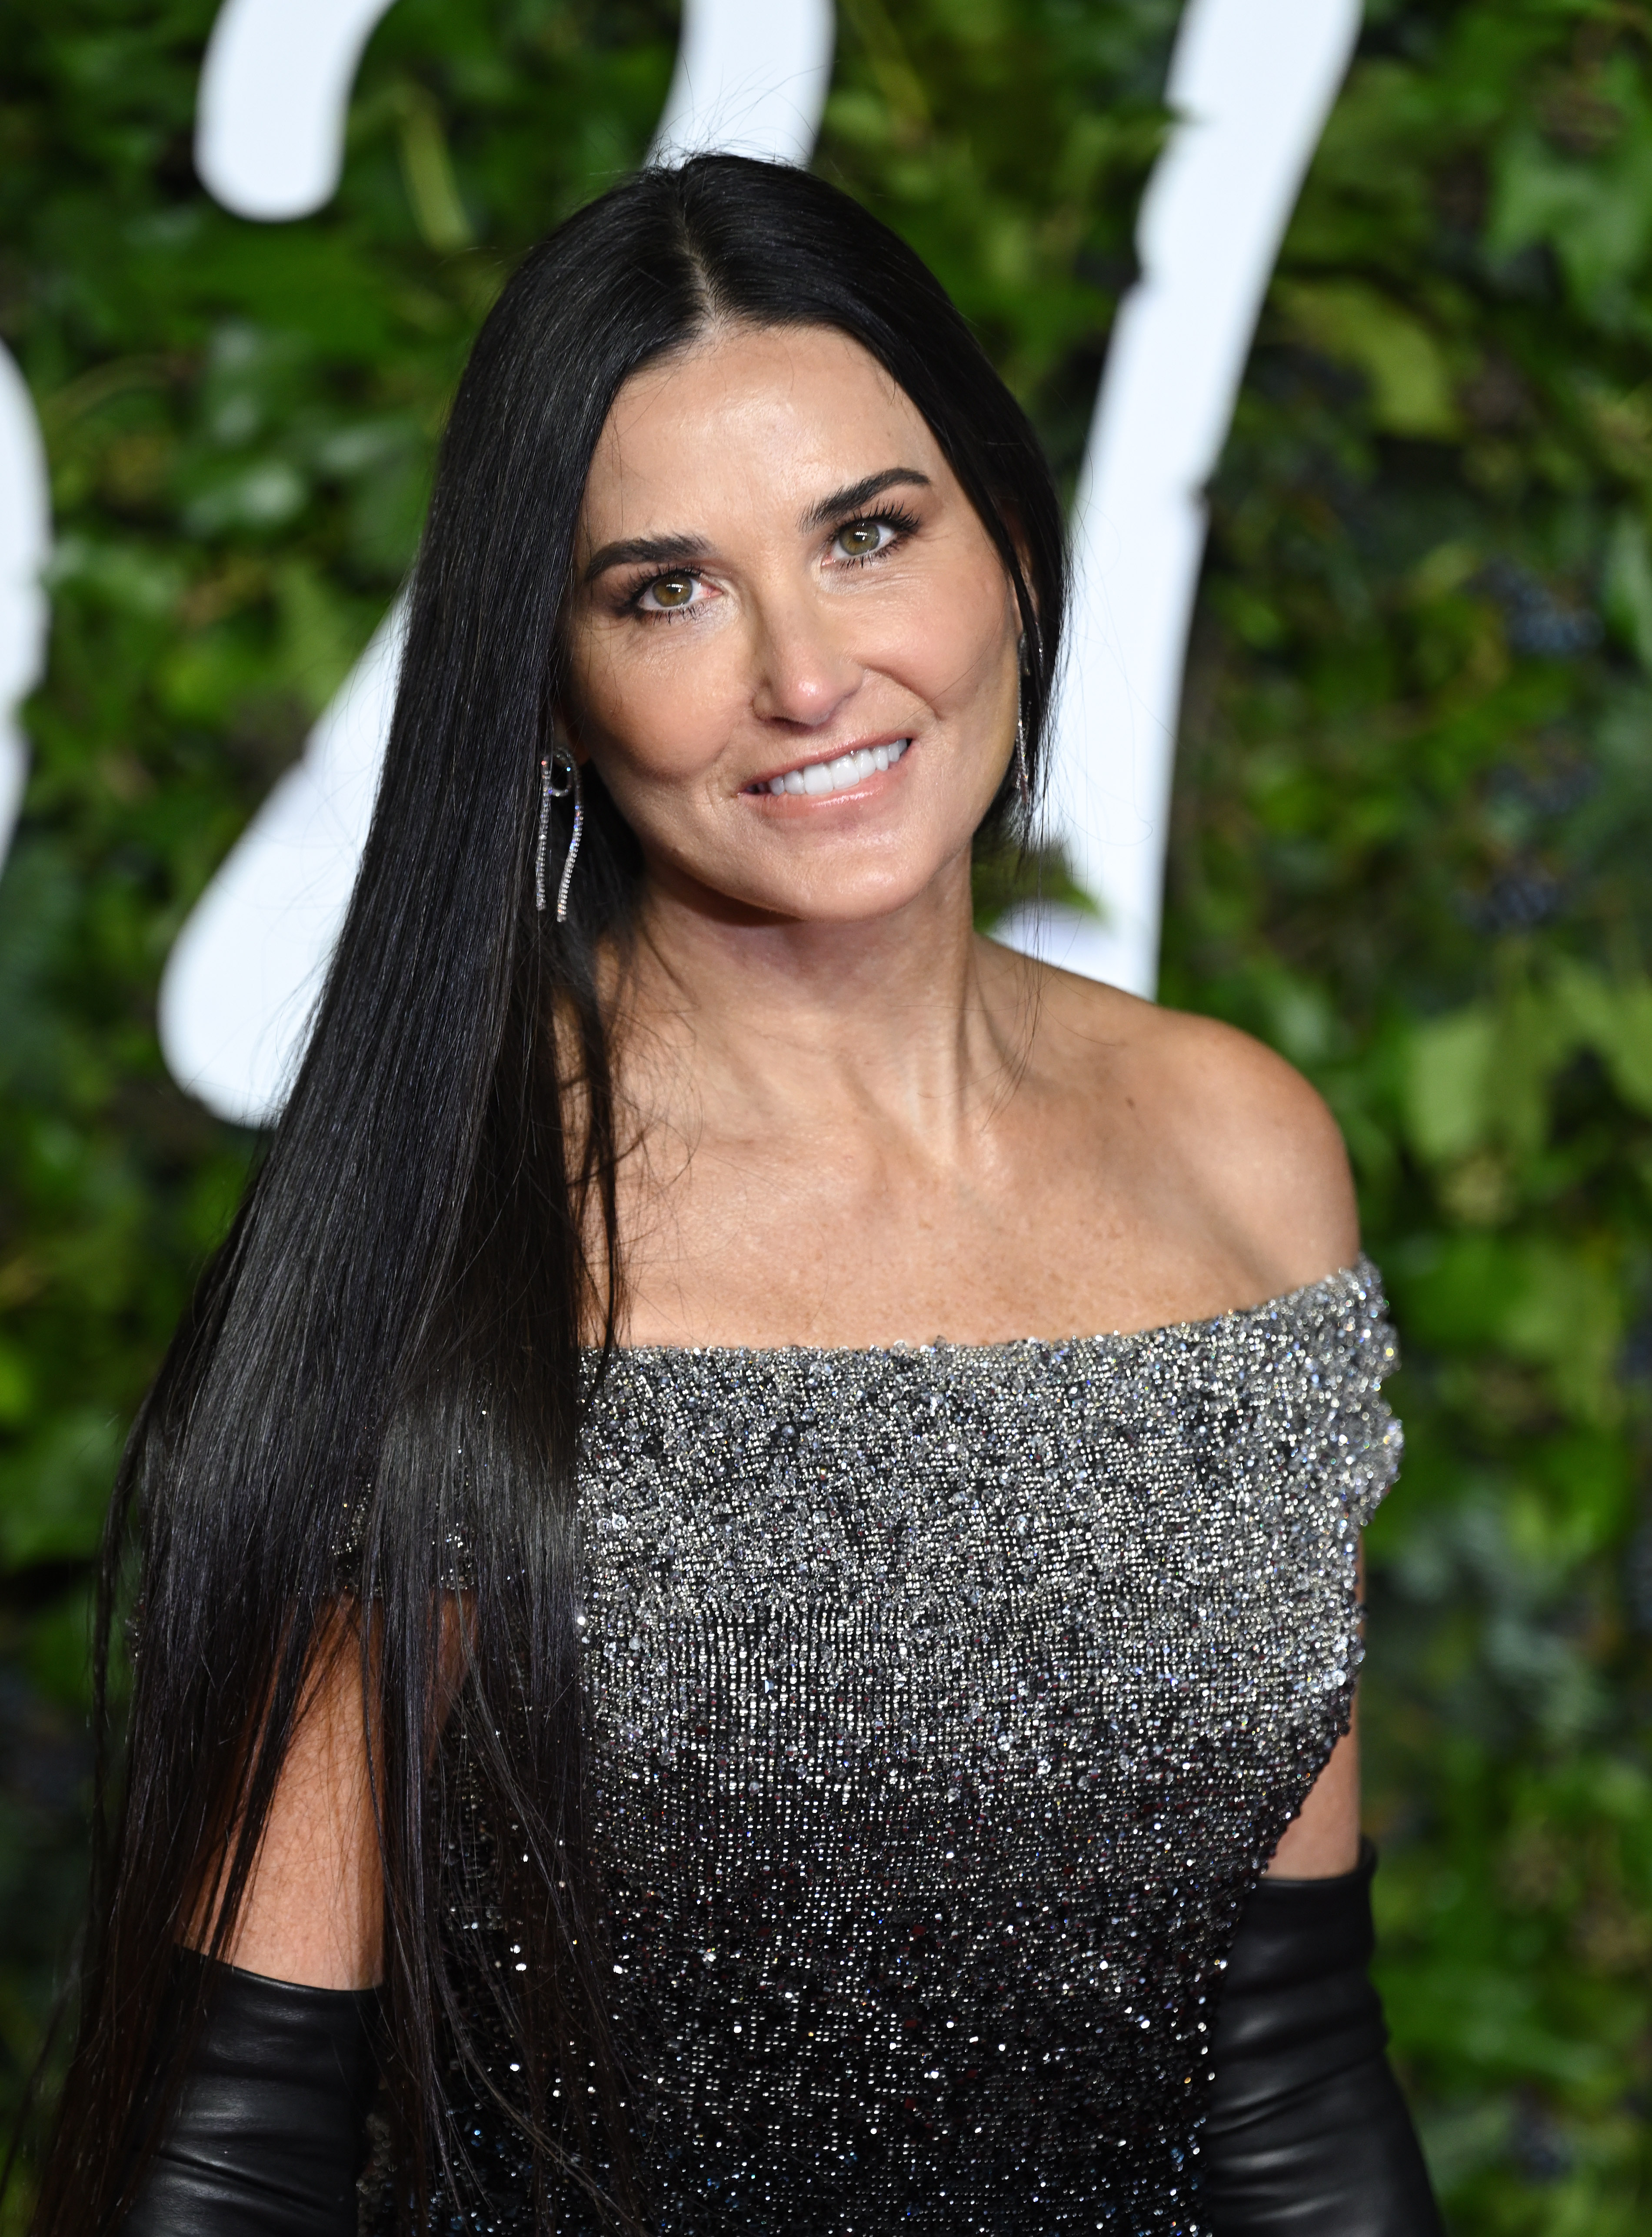 Demi Moore at the Royal Albert Hall in London in 2021 | Source: Getty Images